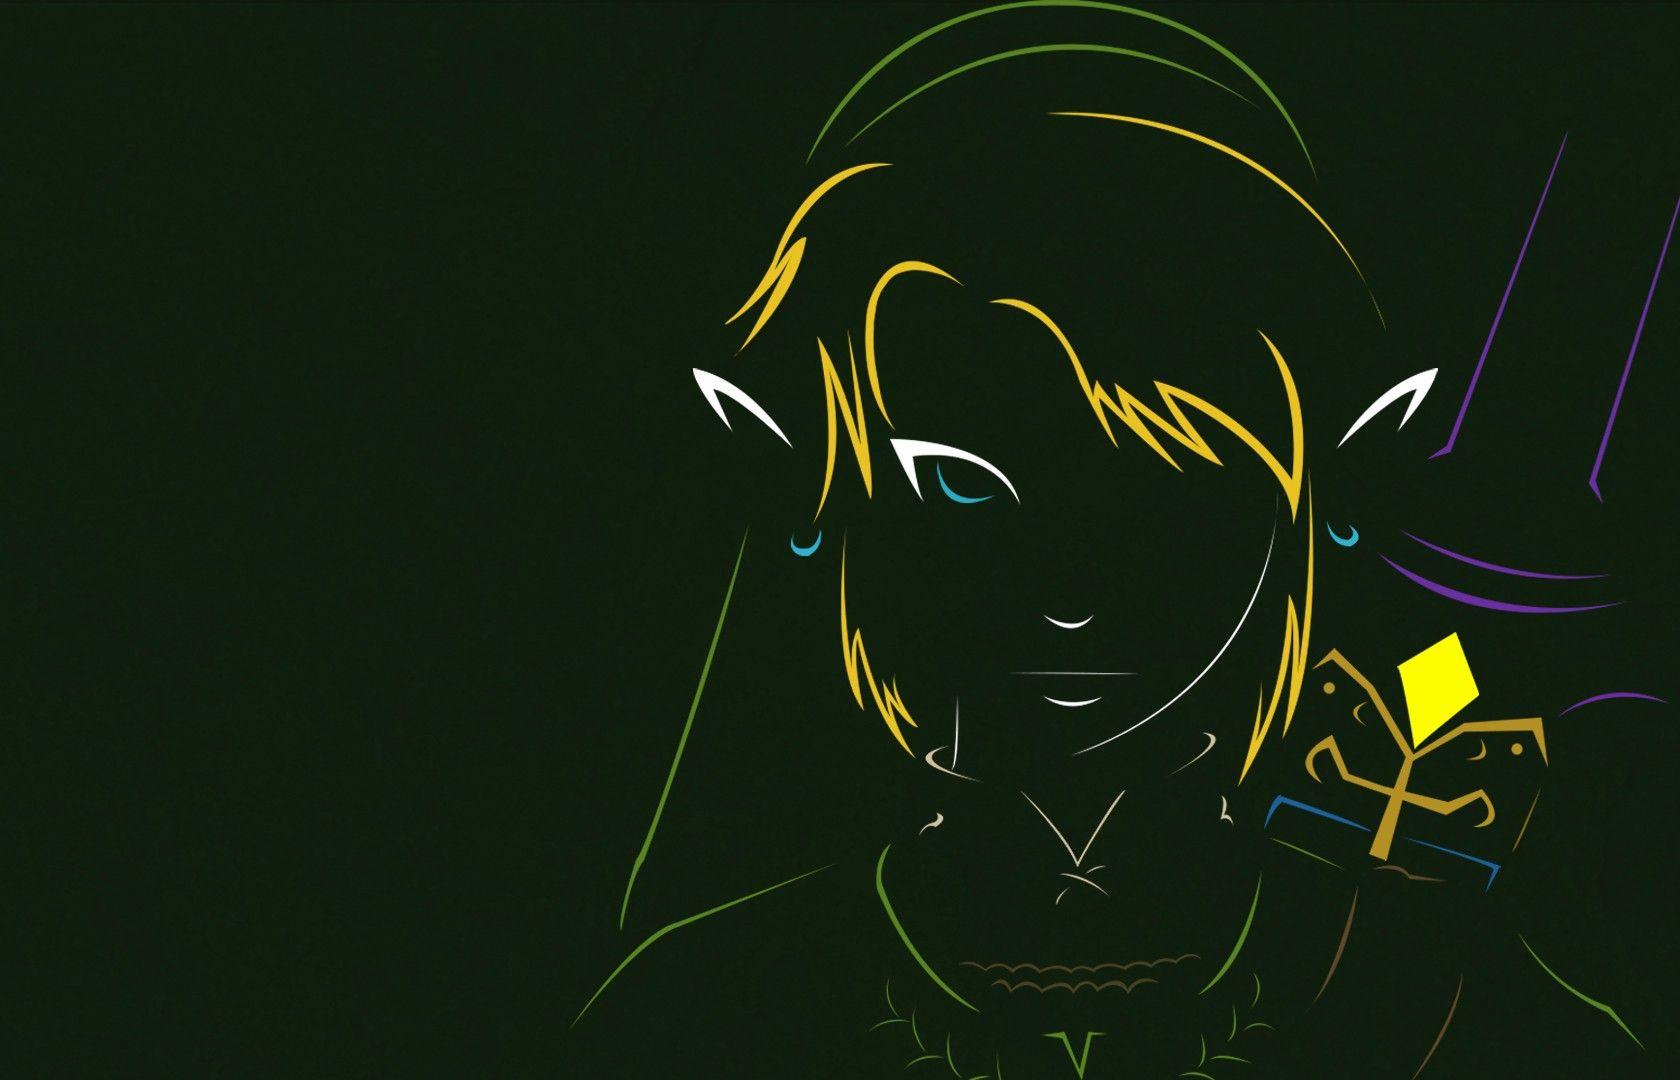 Awesome Link Image Collection: Link Wallpaper